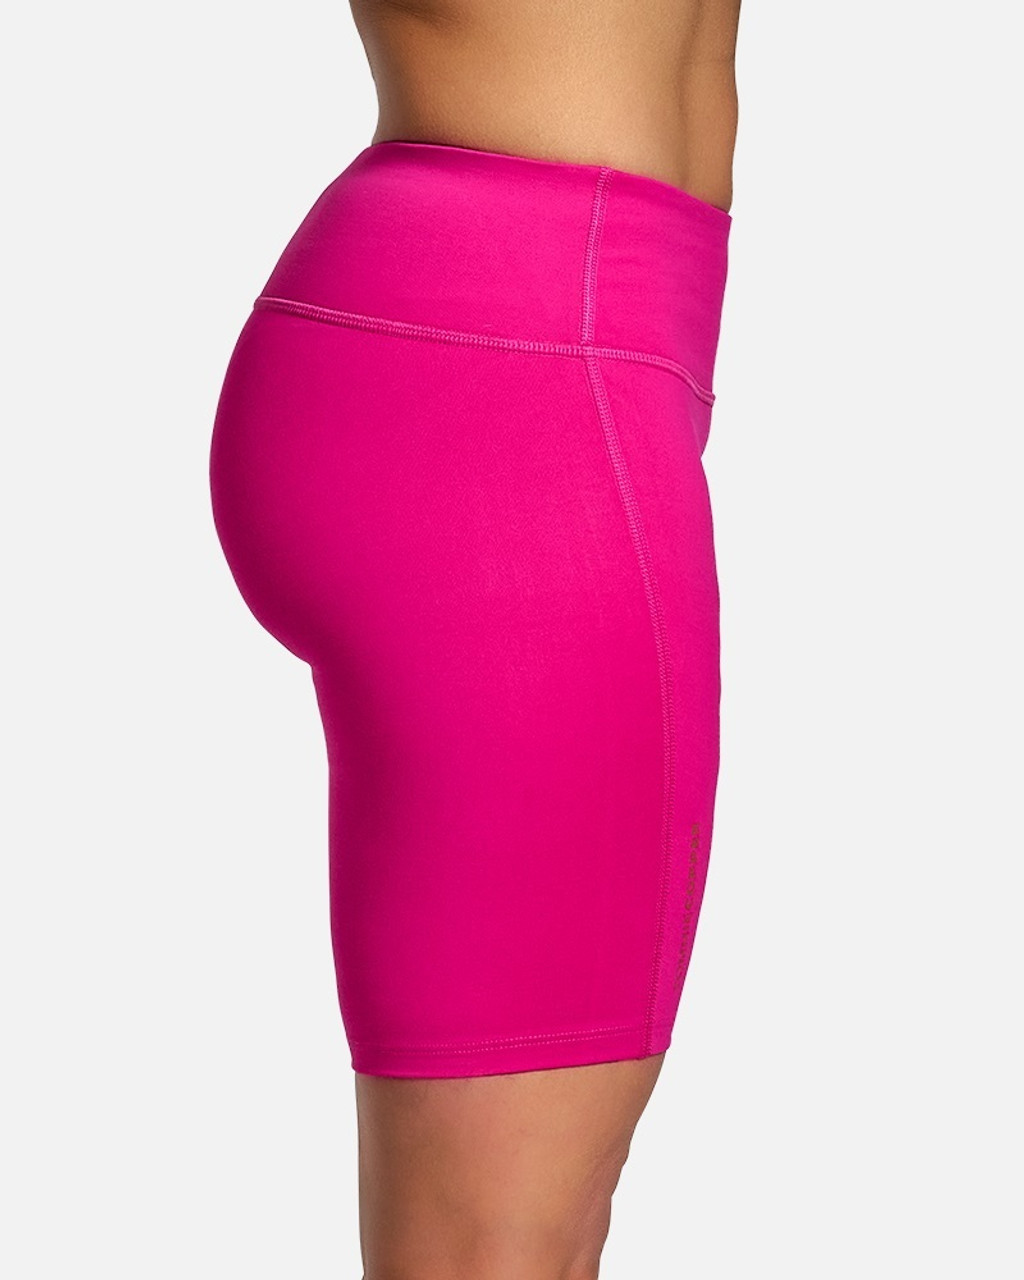 Nude - WOMEN'S/GIRLS-Spandex Compression Shorts